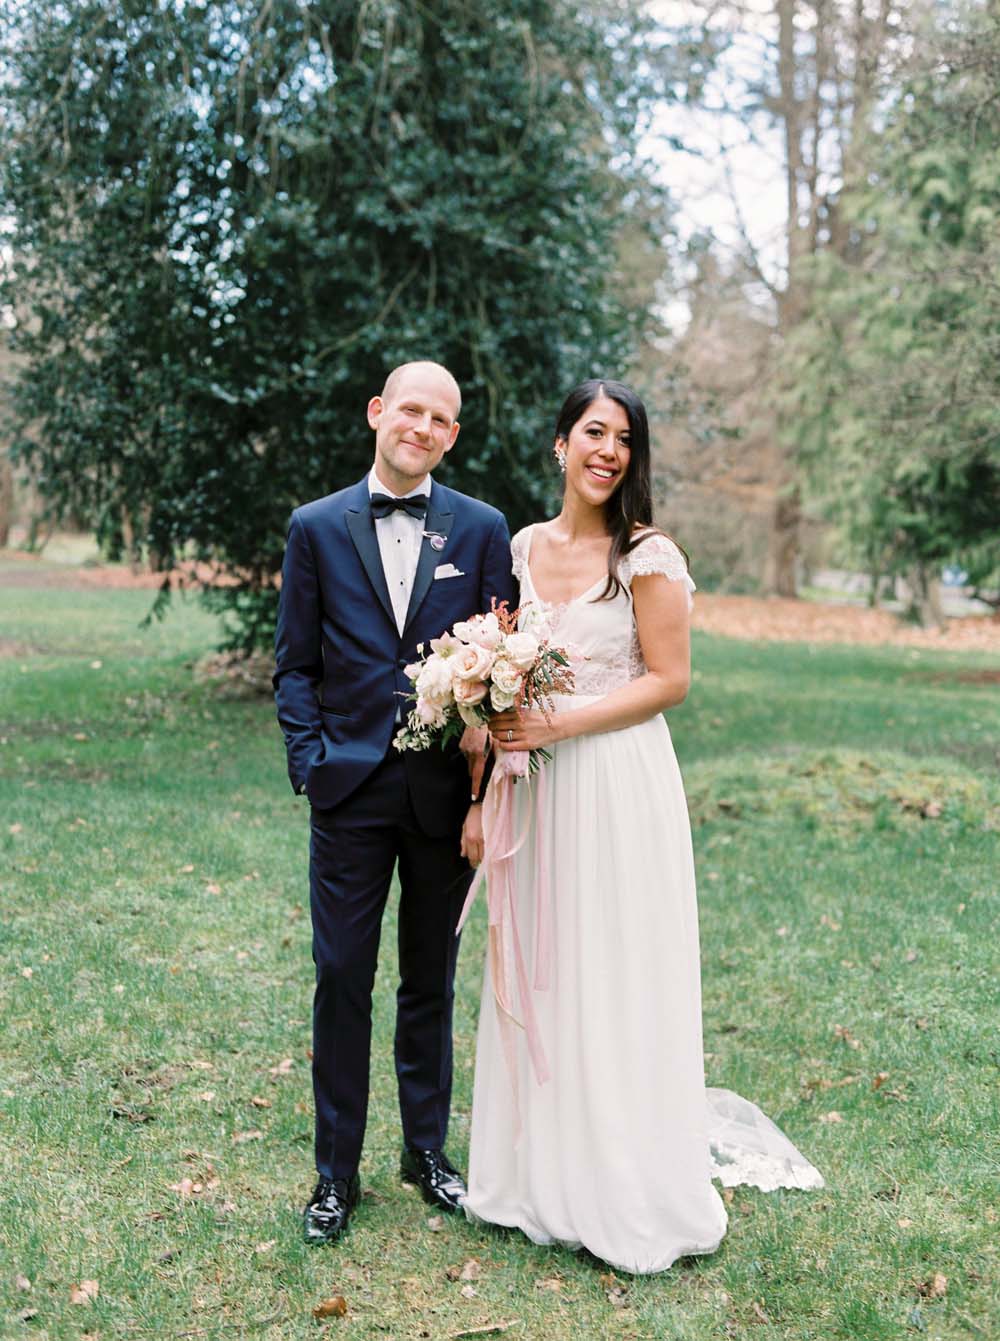 a timeless, romantic wedding in vancouver - bride and groom